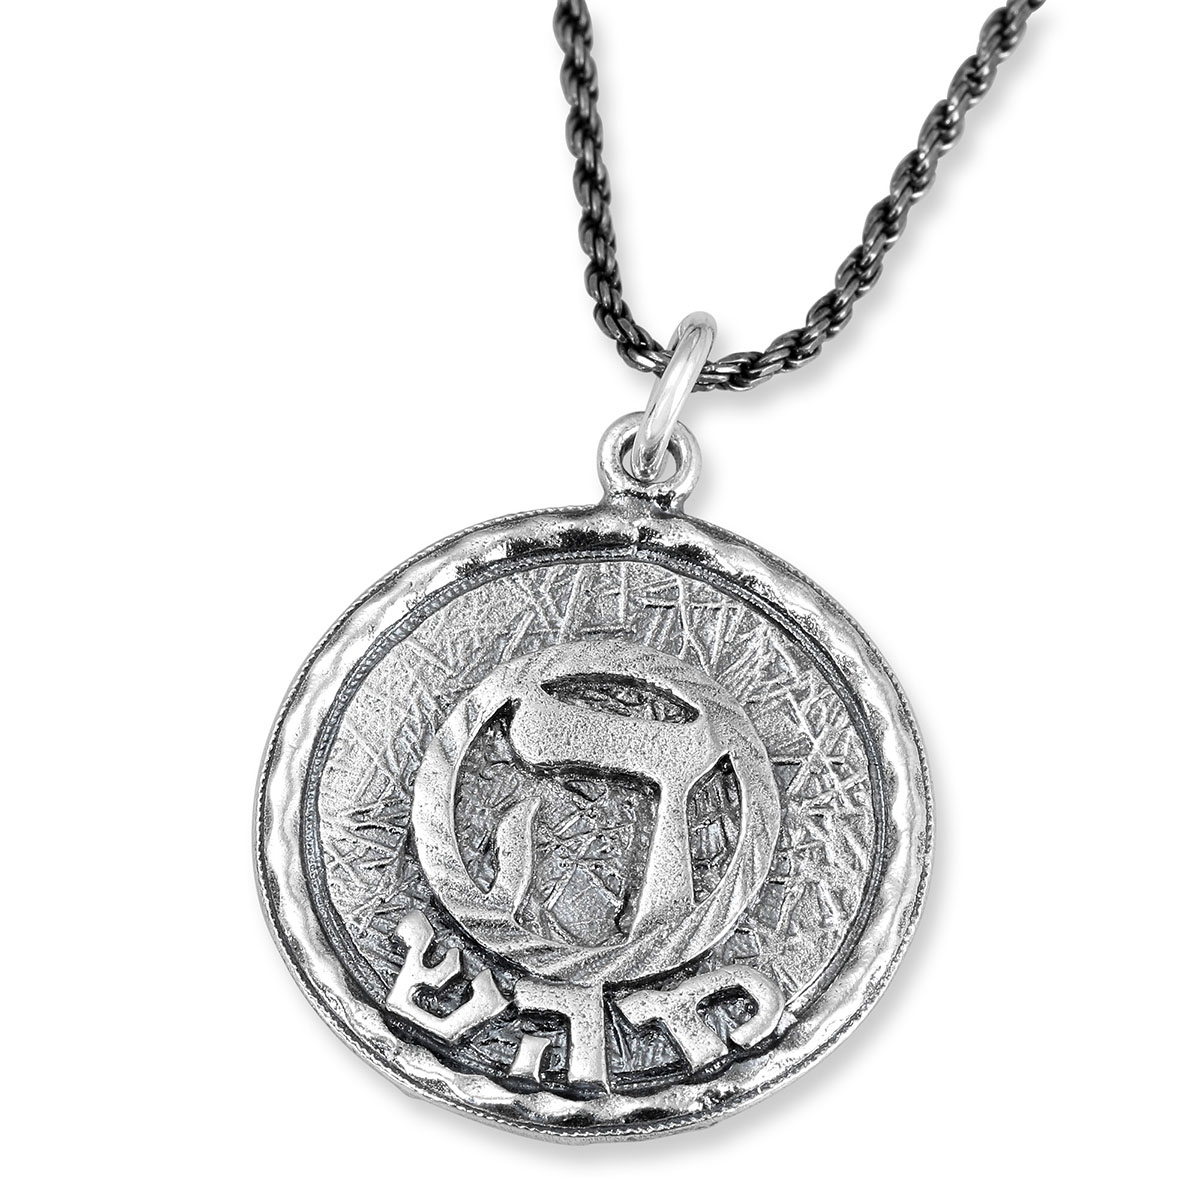 Handmade 925 Sterling Silver Kabbalah Disk Pendant For Healing With Letter "Hey" - 1